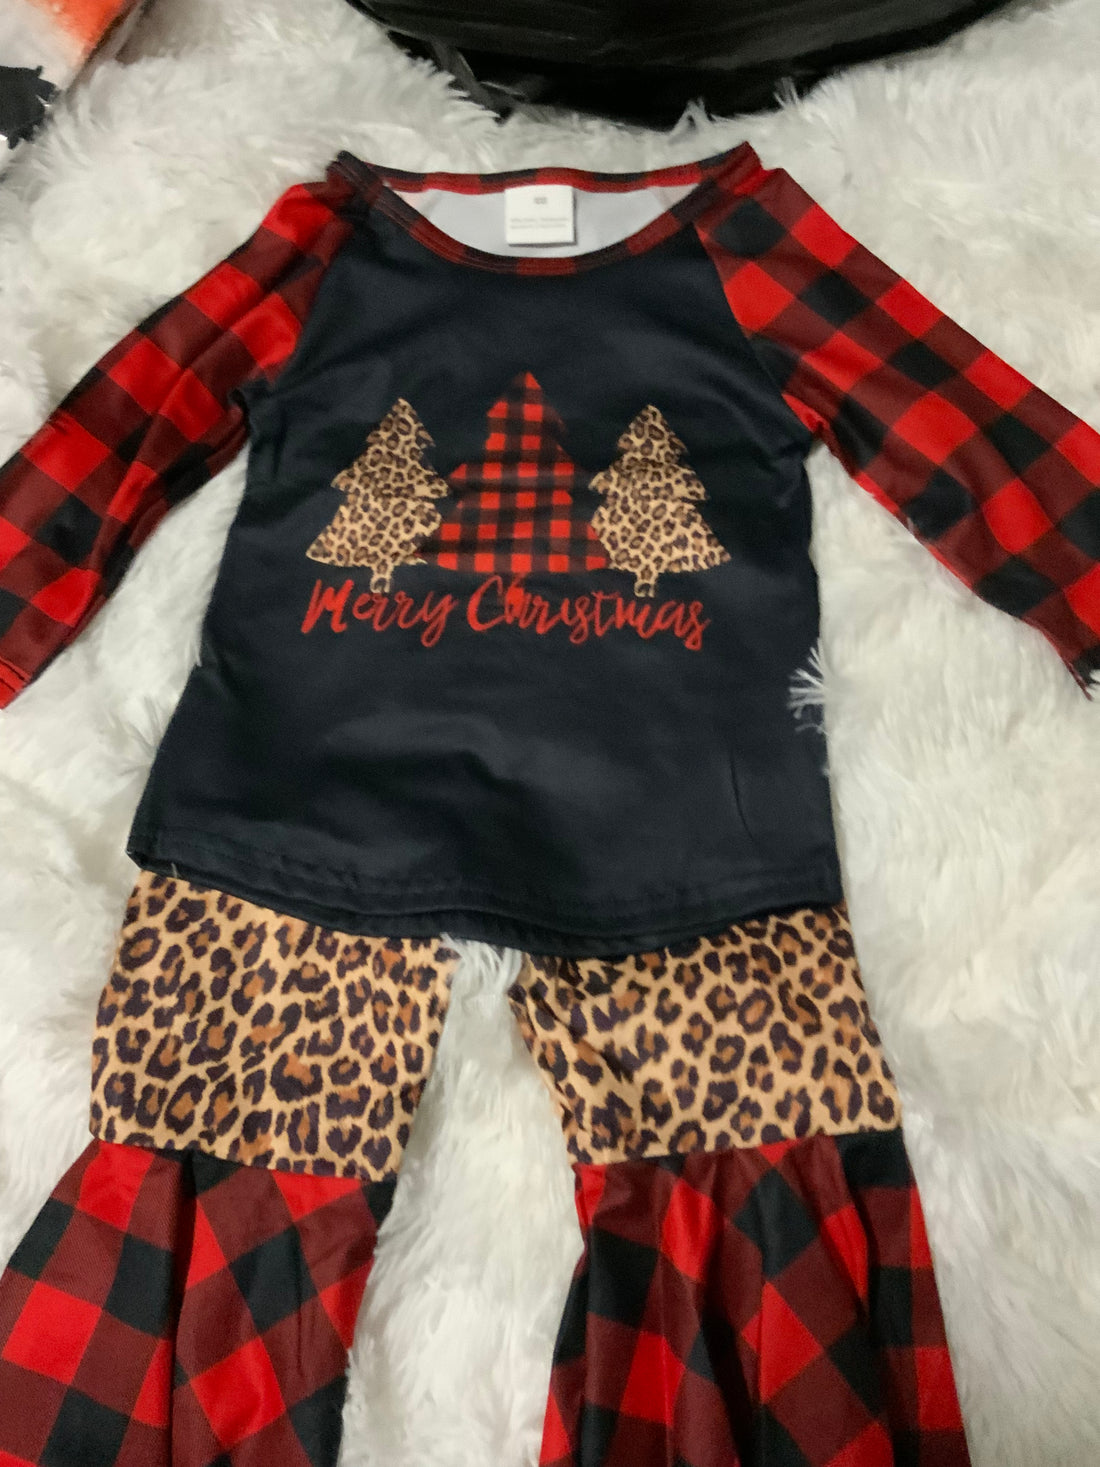 Merry Christmas Long Sleeve Black Graphic Top with Cheetah and Plaid and Bell-bottoms.